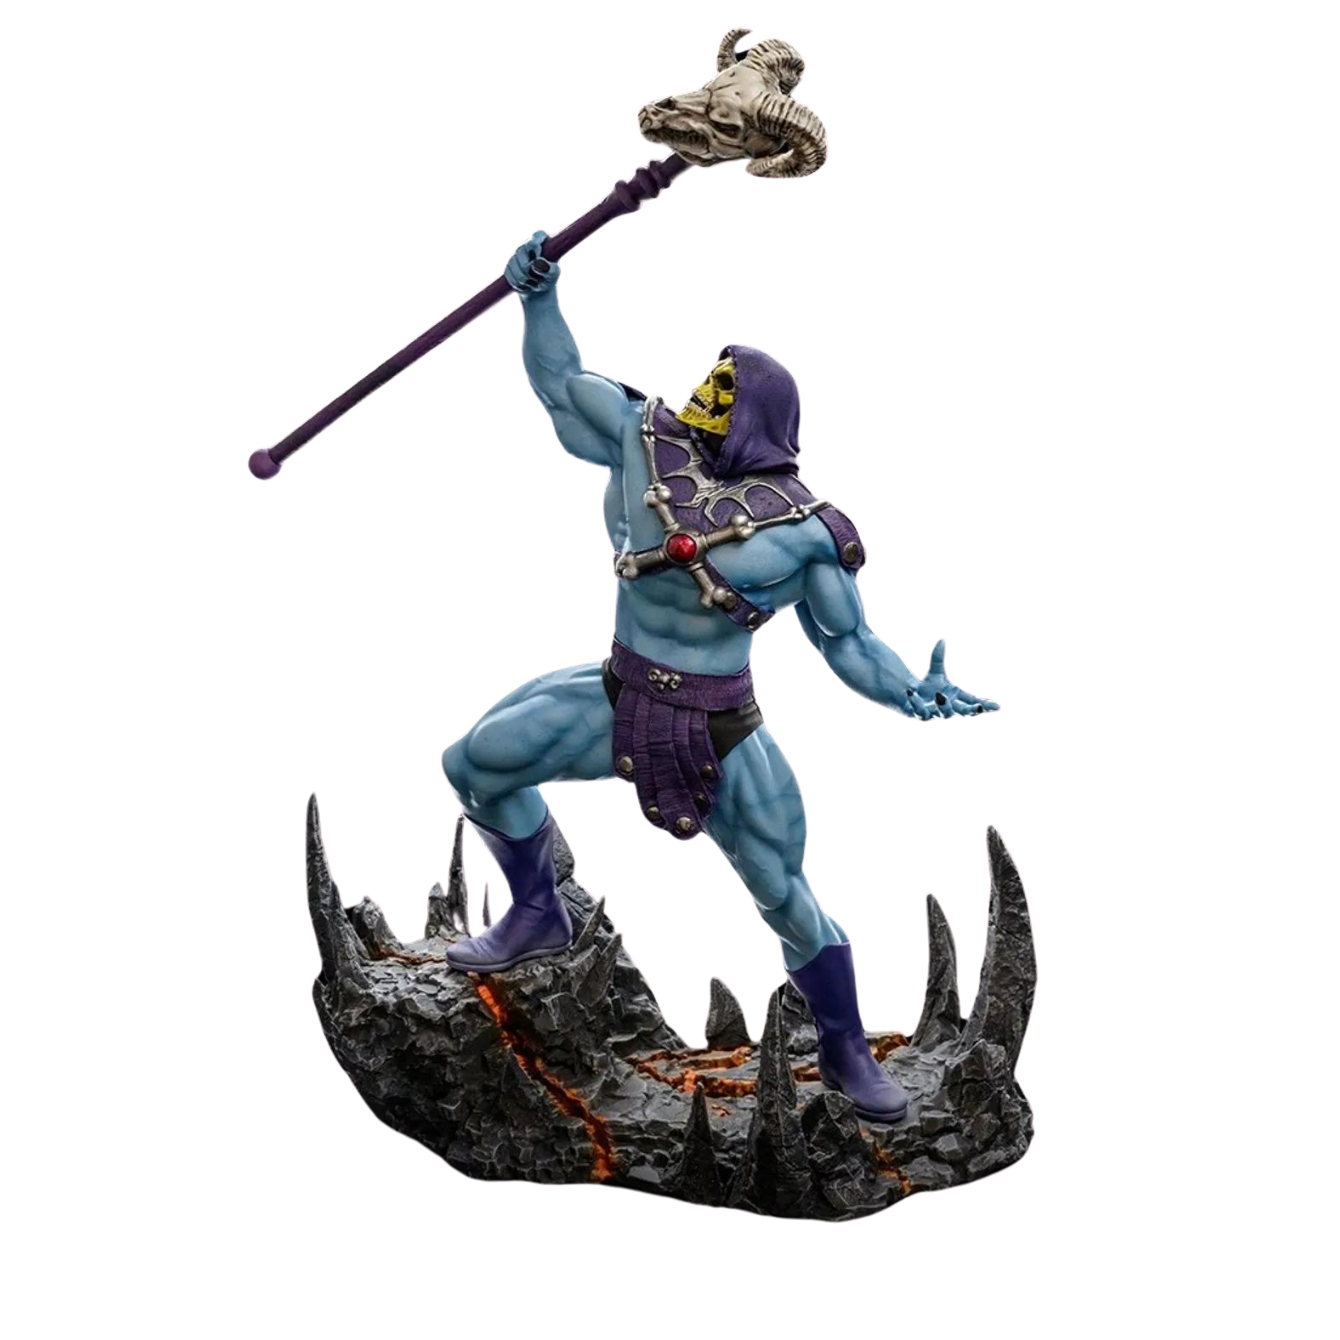 Statue Skeletor - Masters of the Universe - BDS Art Scale 1/10 - Iron Studios